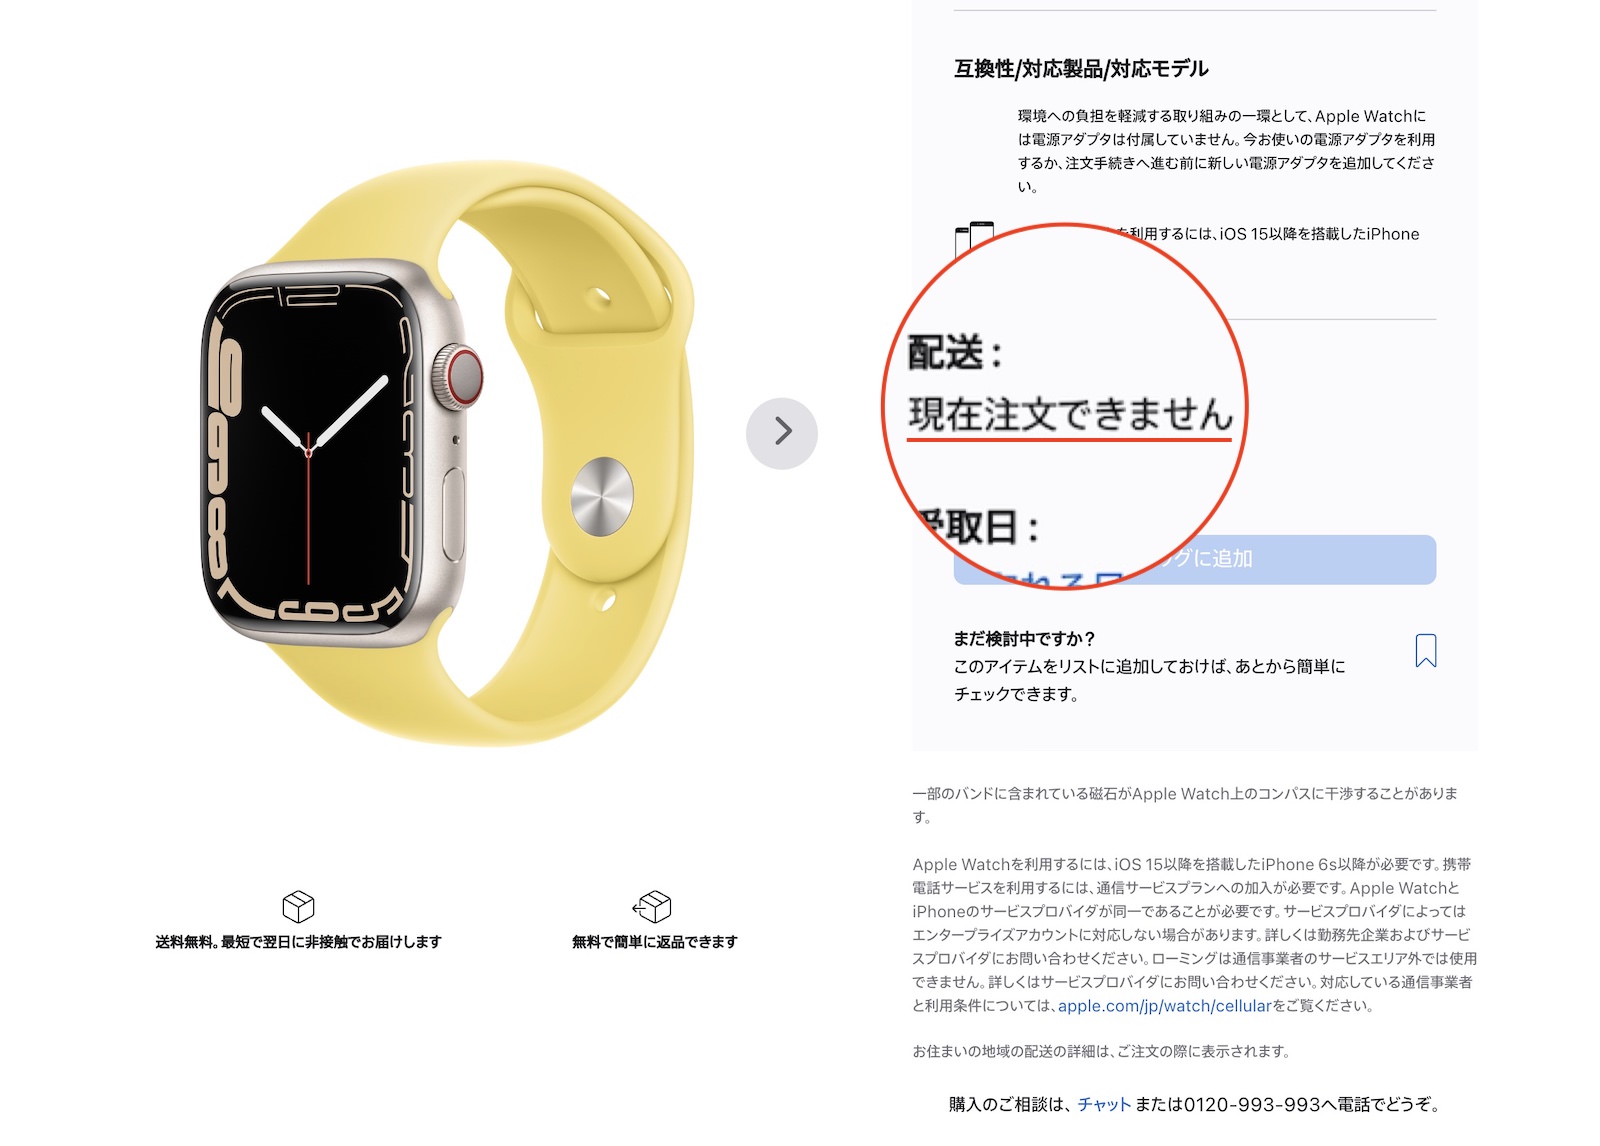 Apple Watch Models out of order